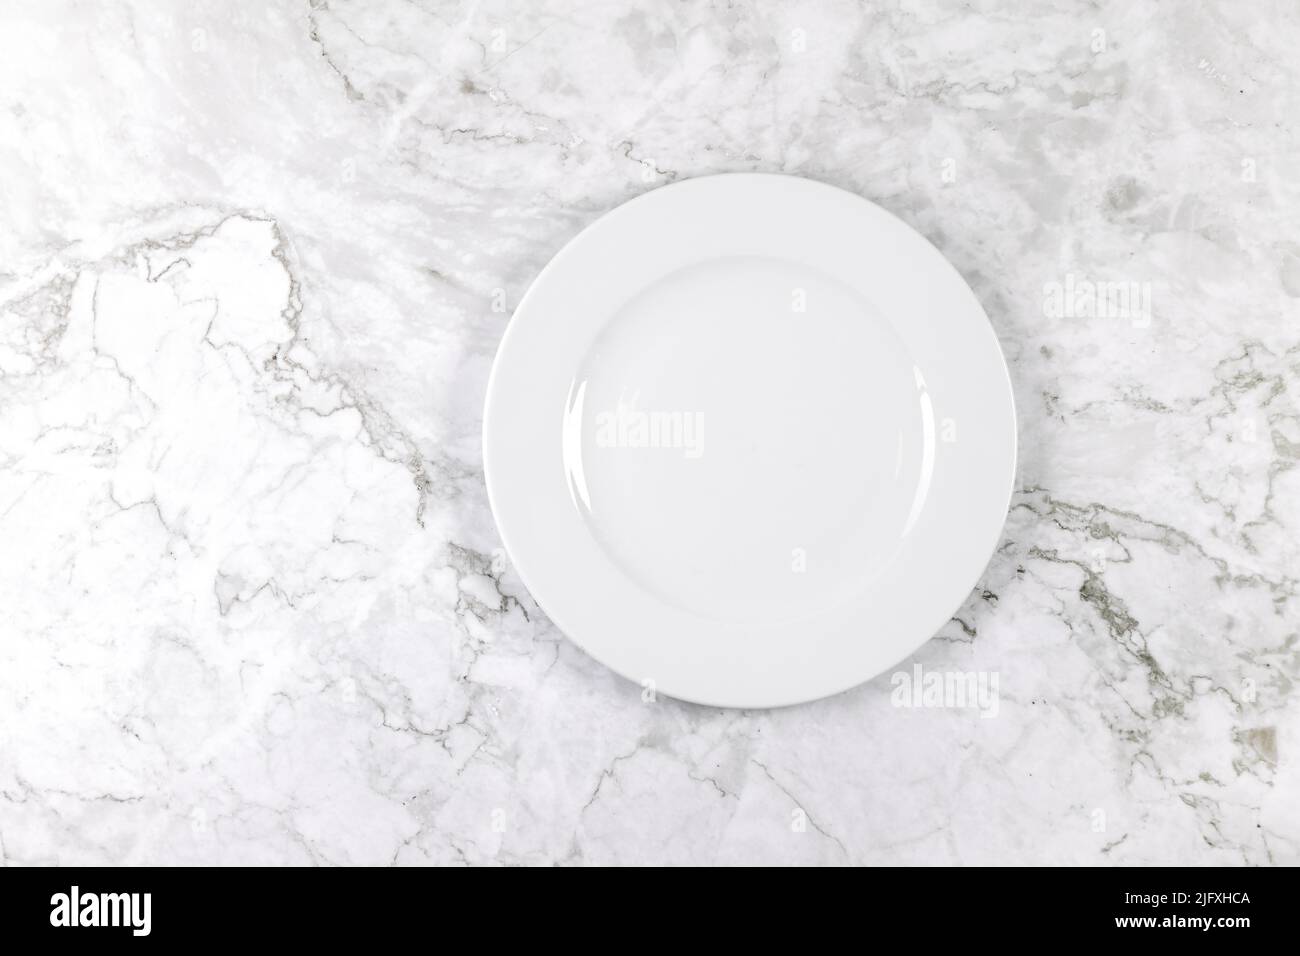 Dinner plate on a white and grey marble surface Stock Photo